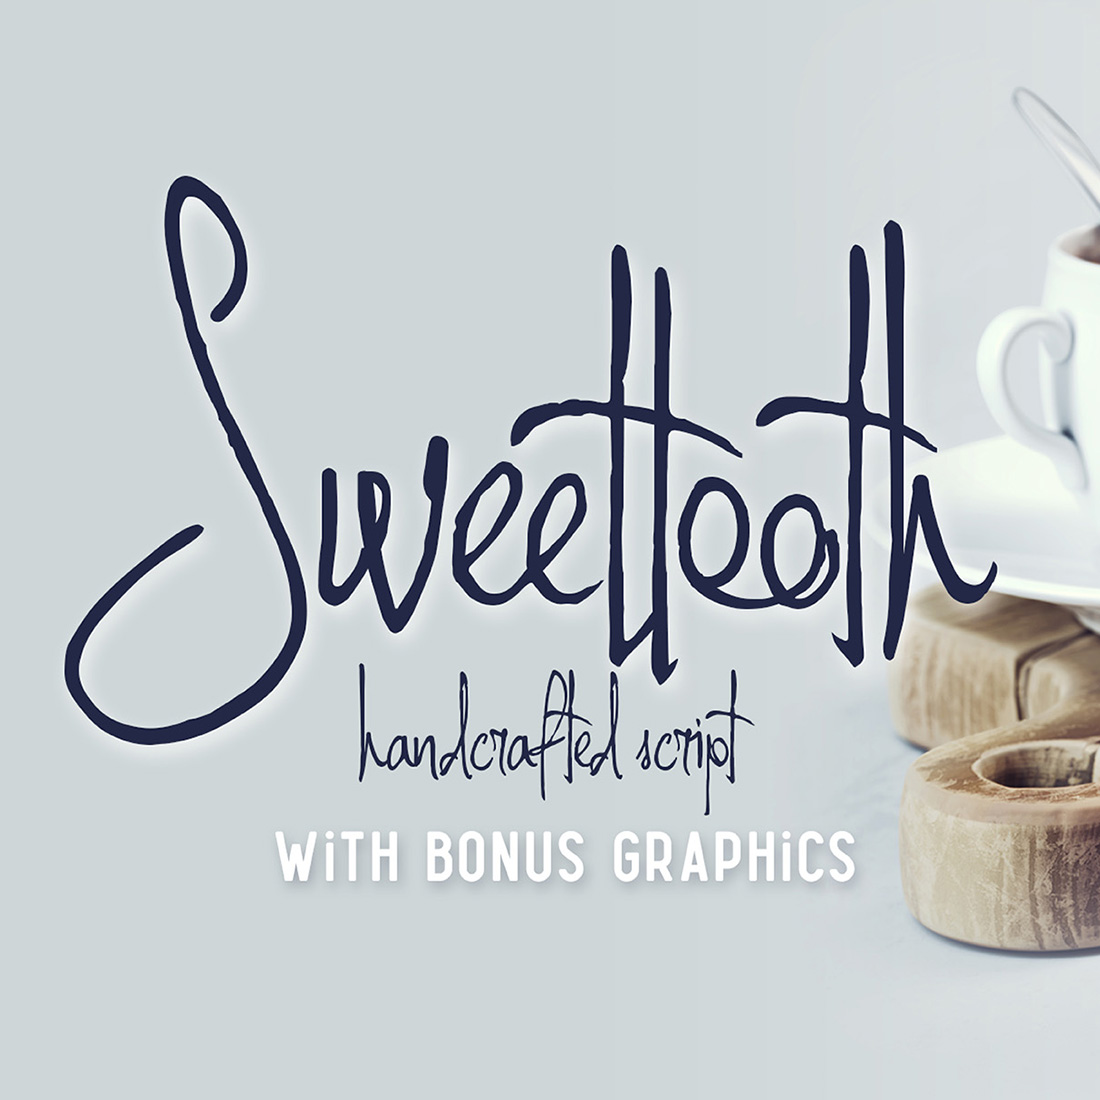 Sweettooth Script Font cover image.